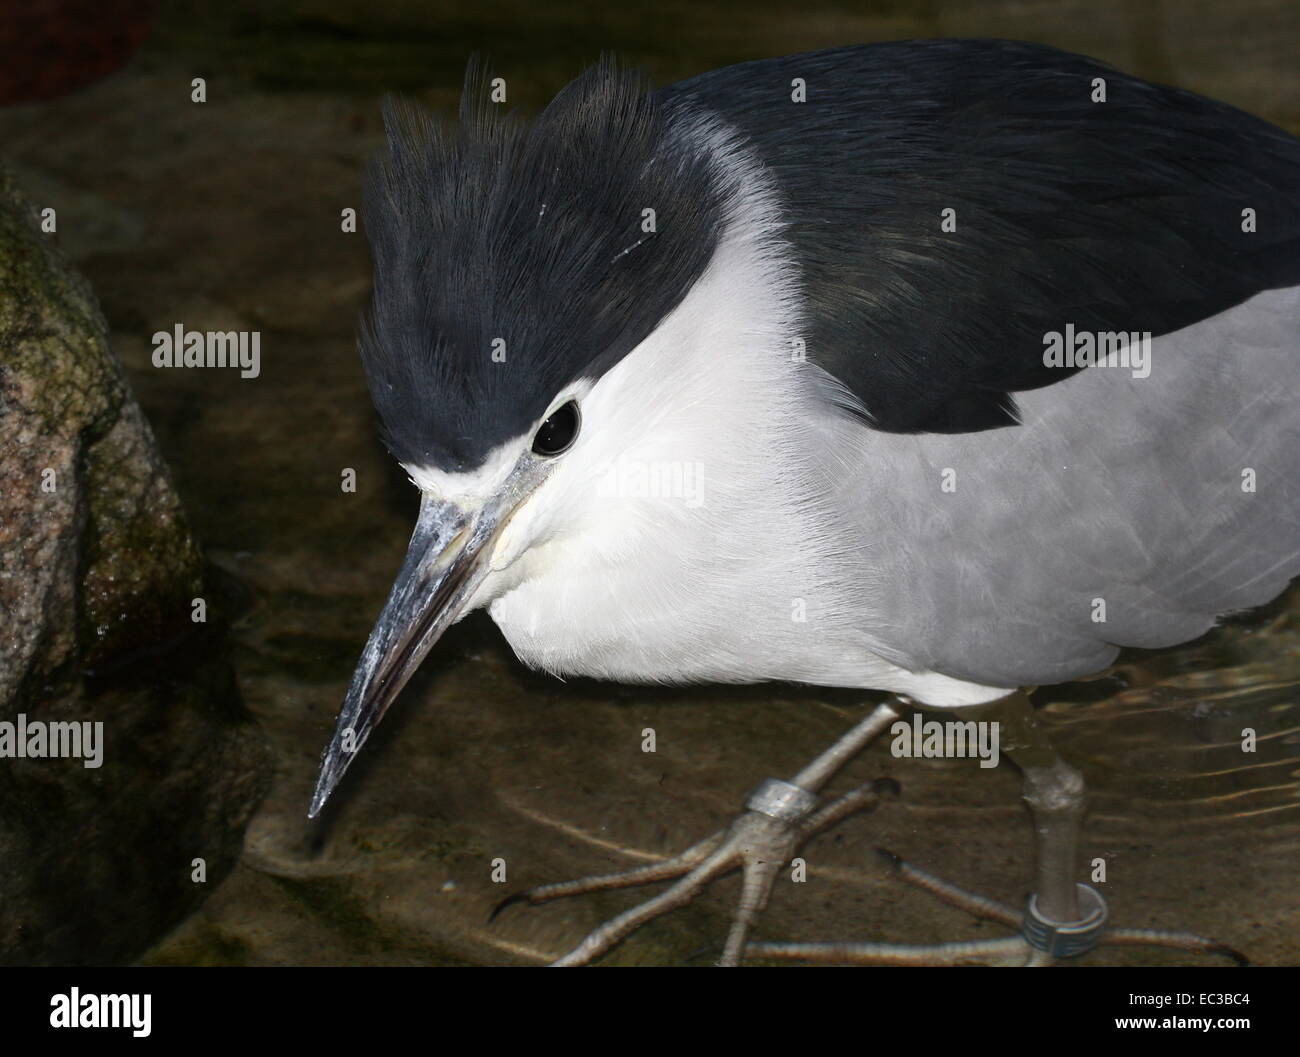 Black-crowned night heron (Nycticorax nycticorax), close-up of the head Stock Photo